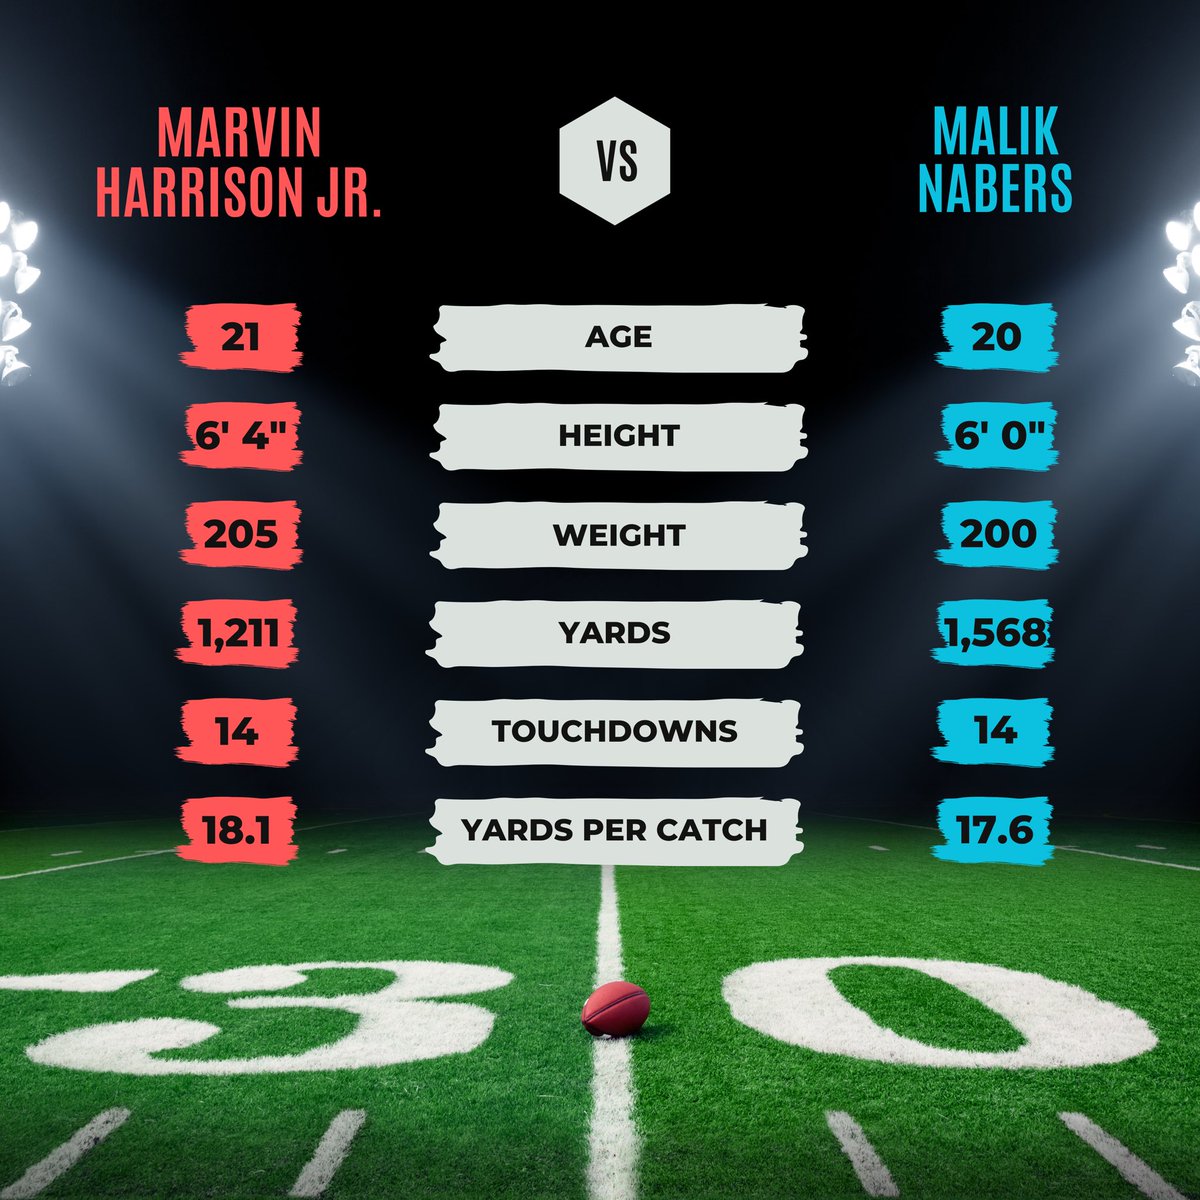 Tough choice! Marvin Harrison Jr. with his elite route running and hands? Or Malik Nabers with his explosive plays and versatility? 🏈 Who would you draft as your go-to WR? Drop your thoughts below! ⬇️ #NFLDraft #MarvinHarrisonJr #MalikNabers #WideReceiver